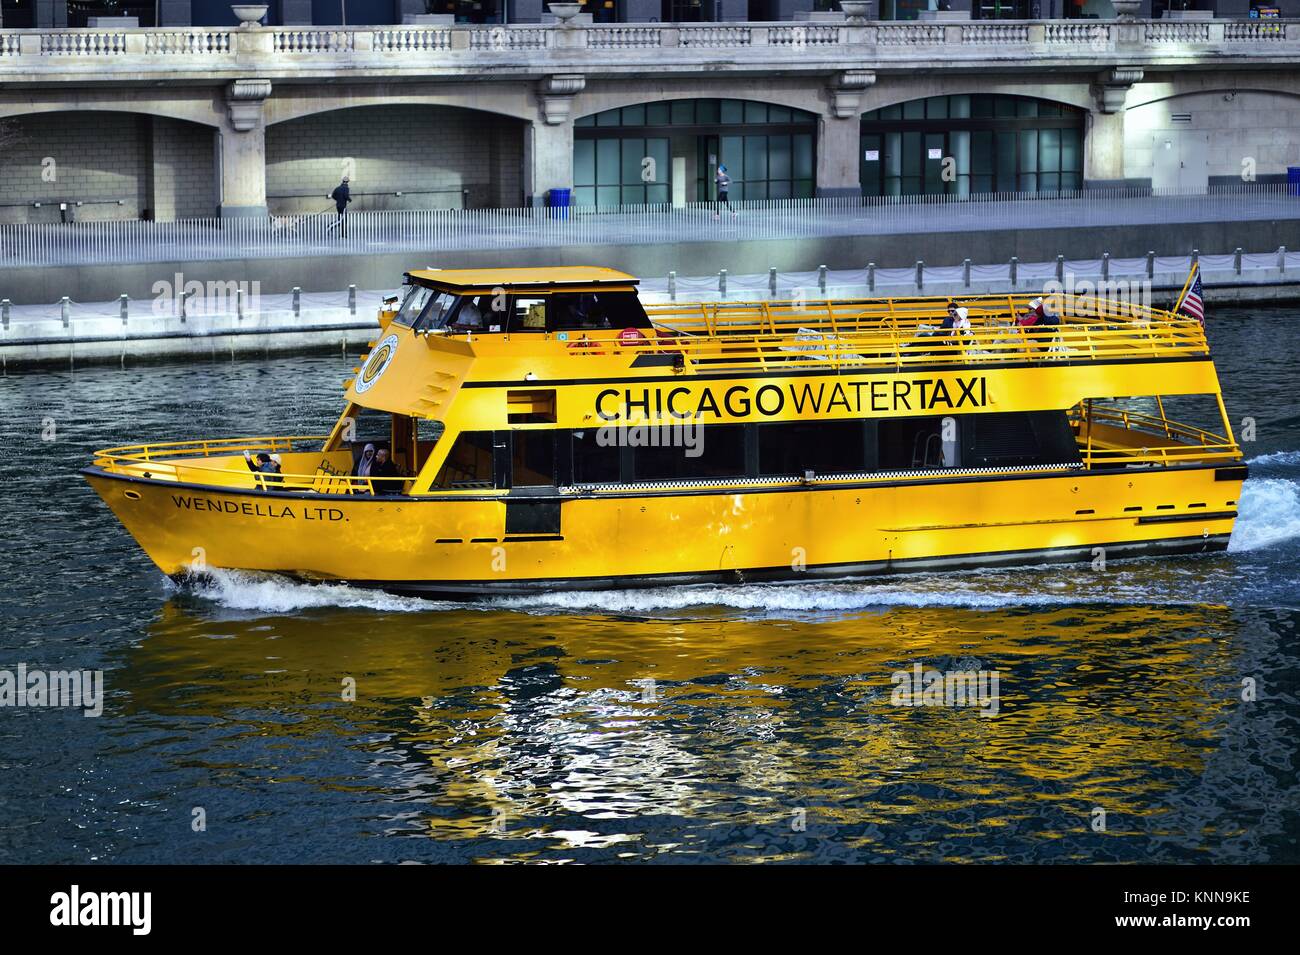 A sparsely attended water taxi on the Chicago River. Chicago, Illinois, USA. Stock Photo